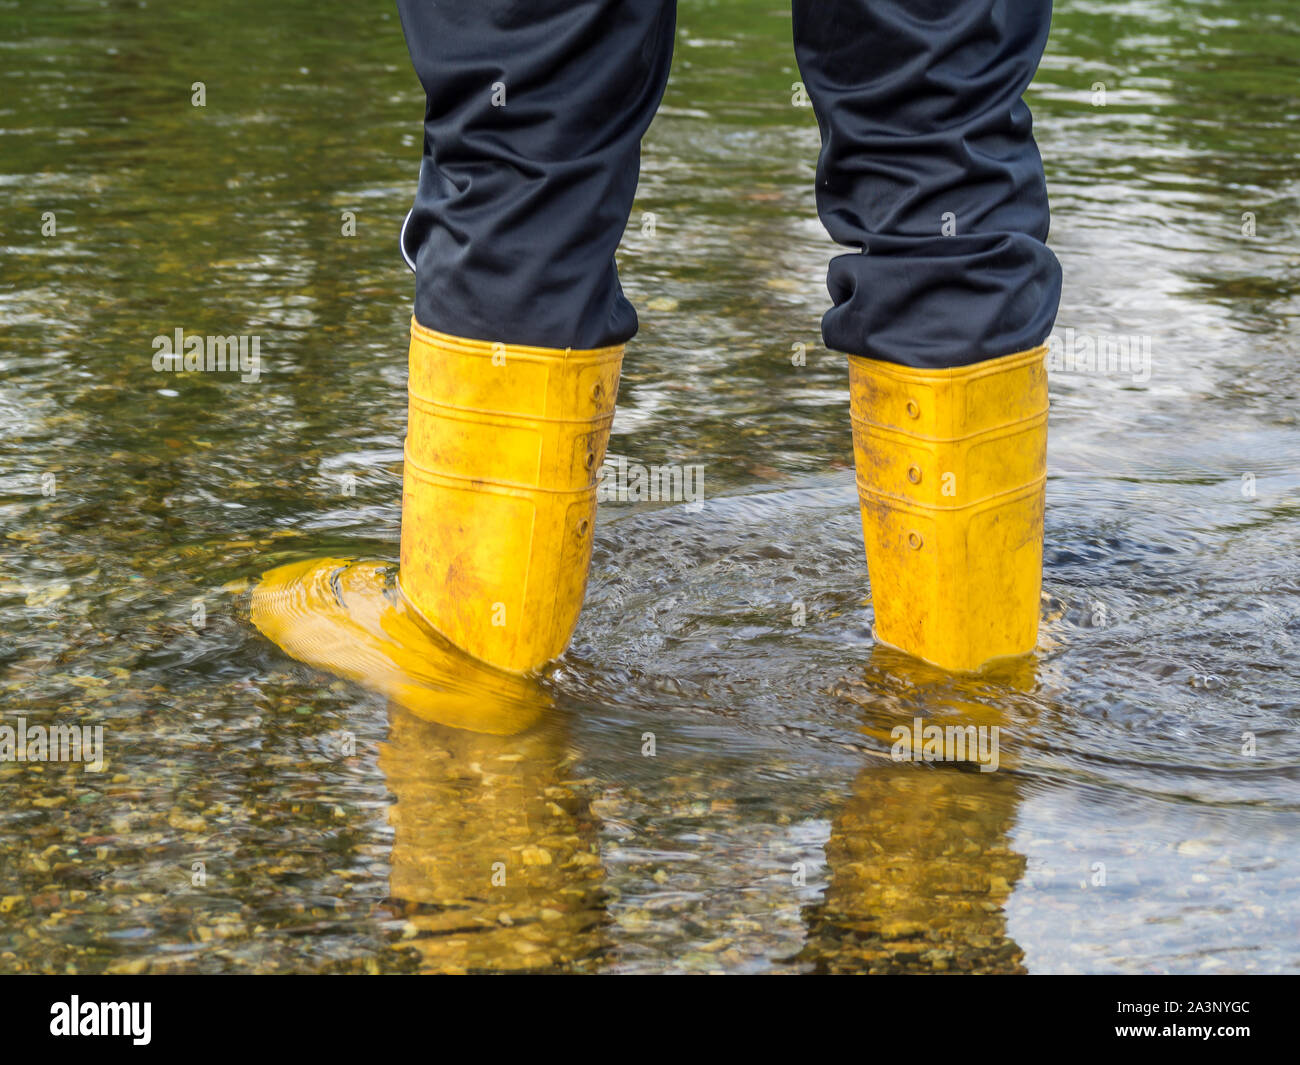 high water boots